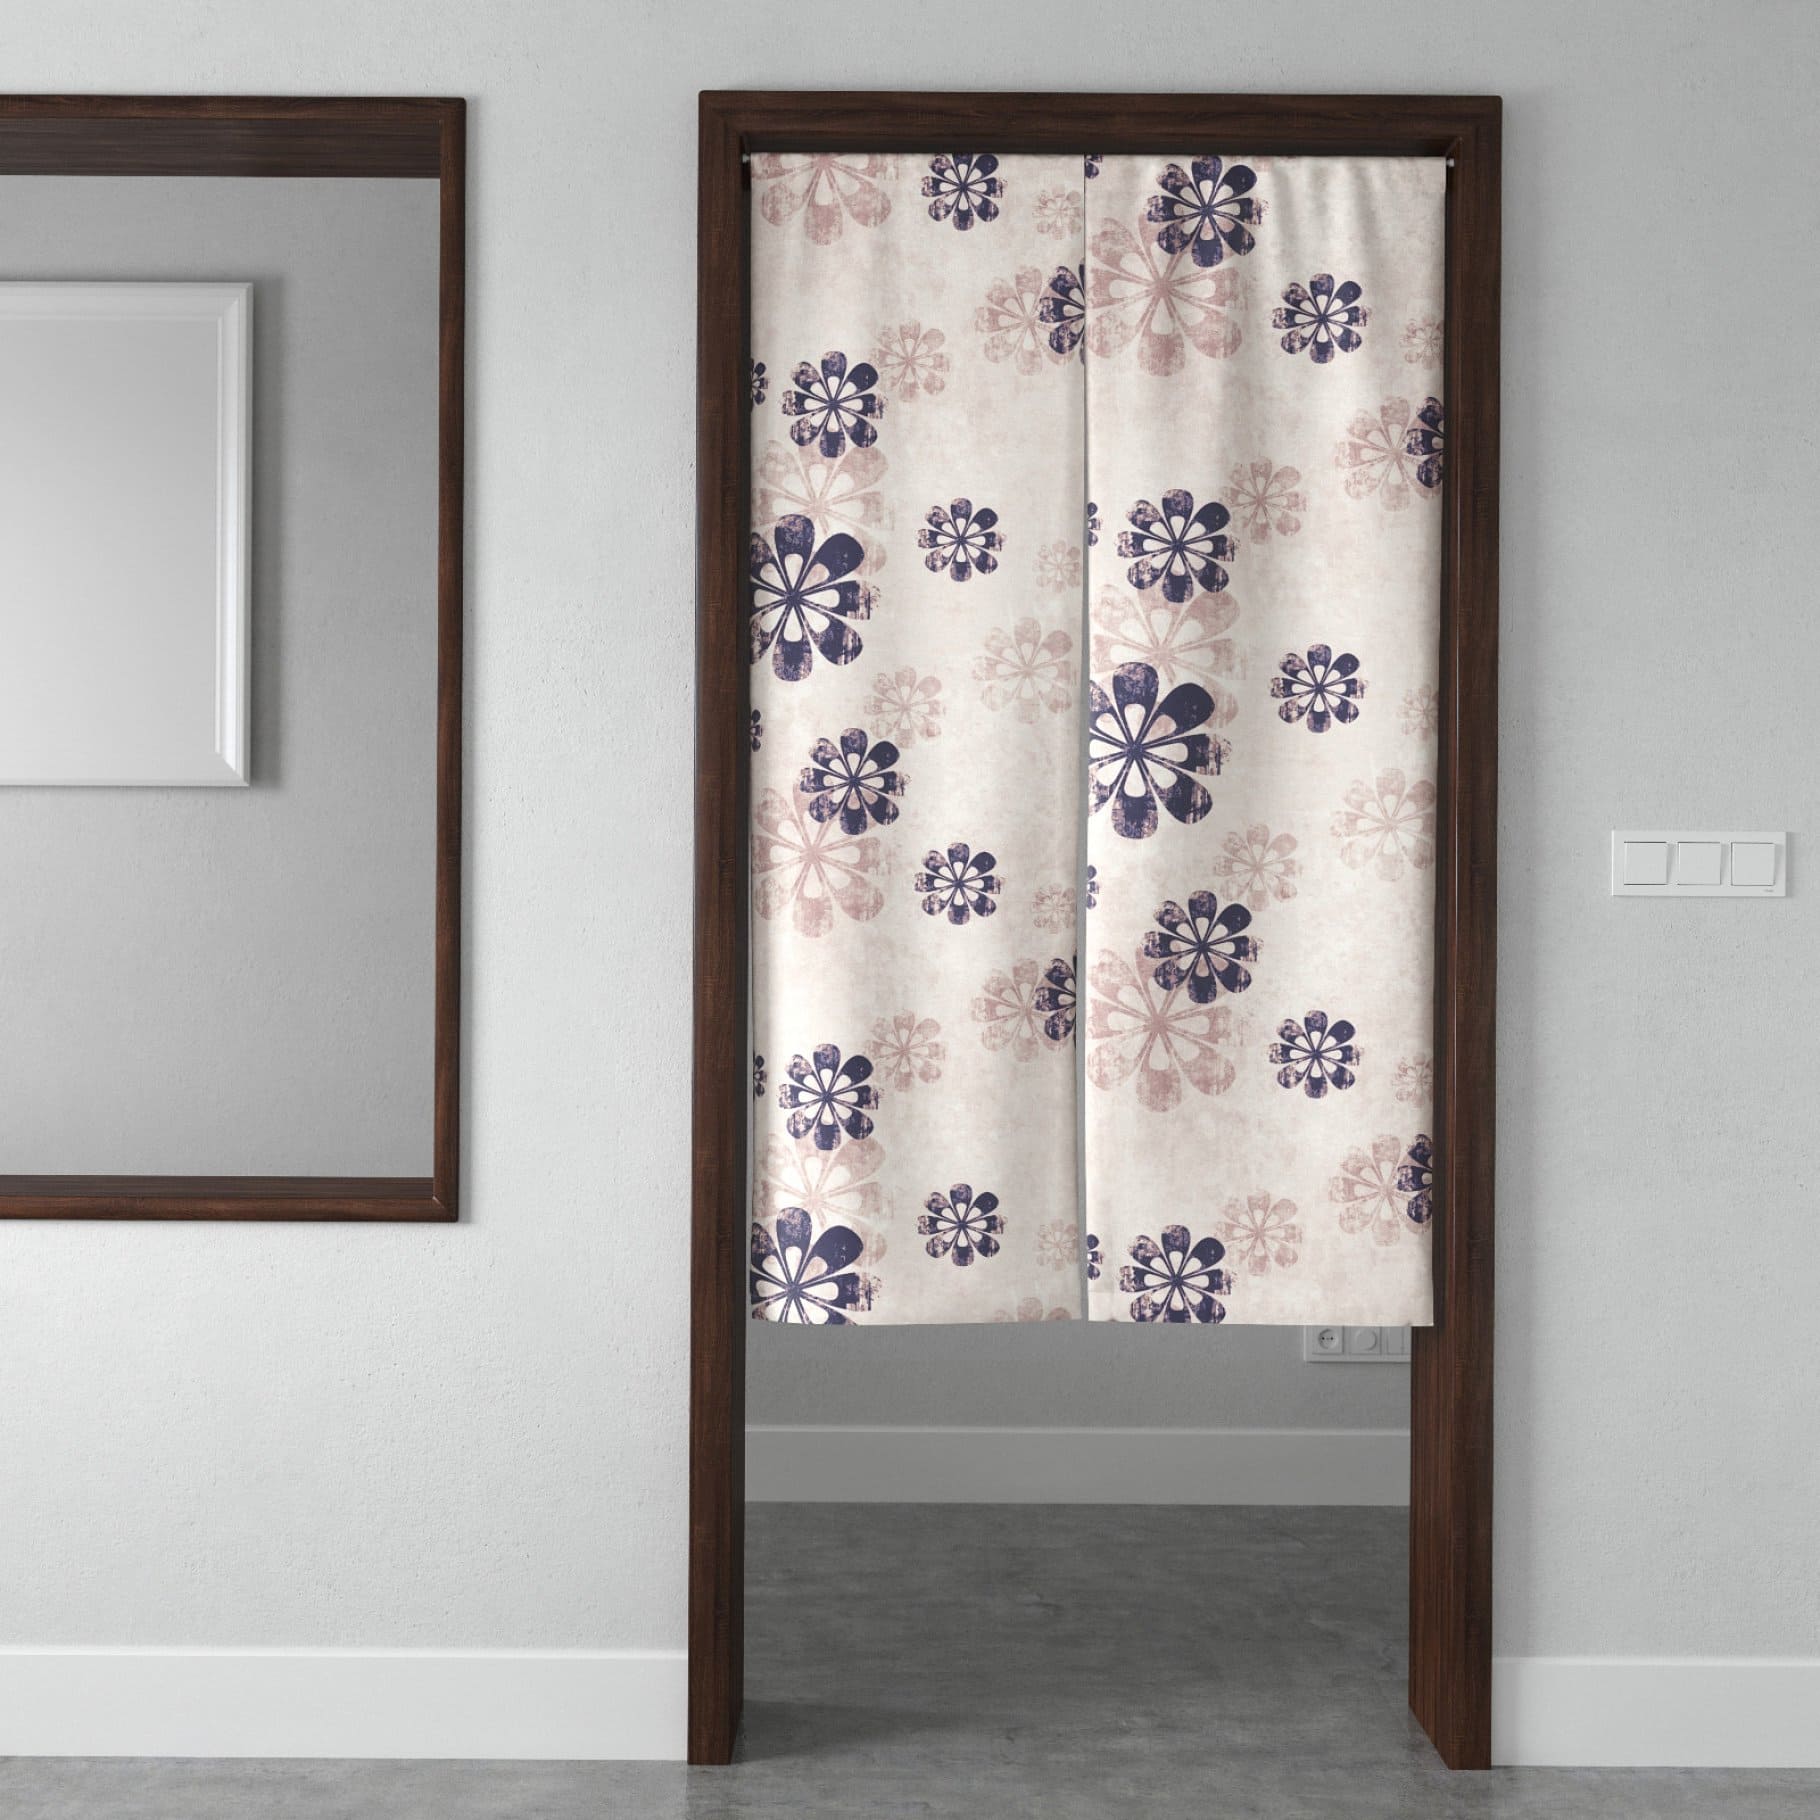 Japanese curtain with flowers in the doorway.